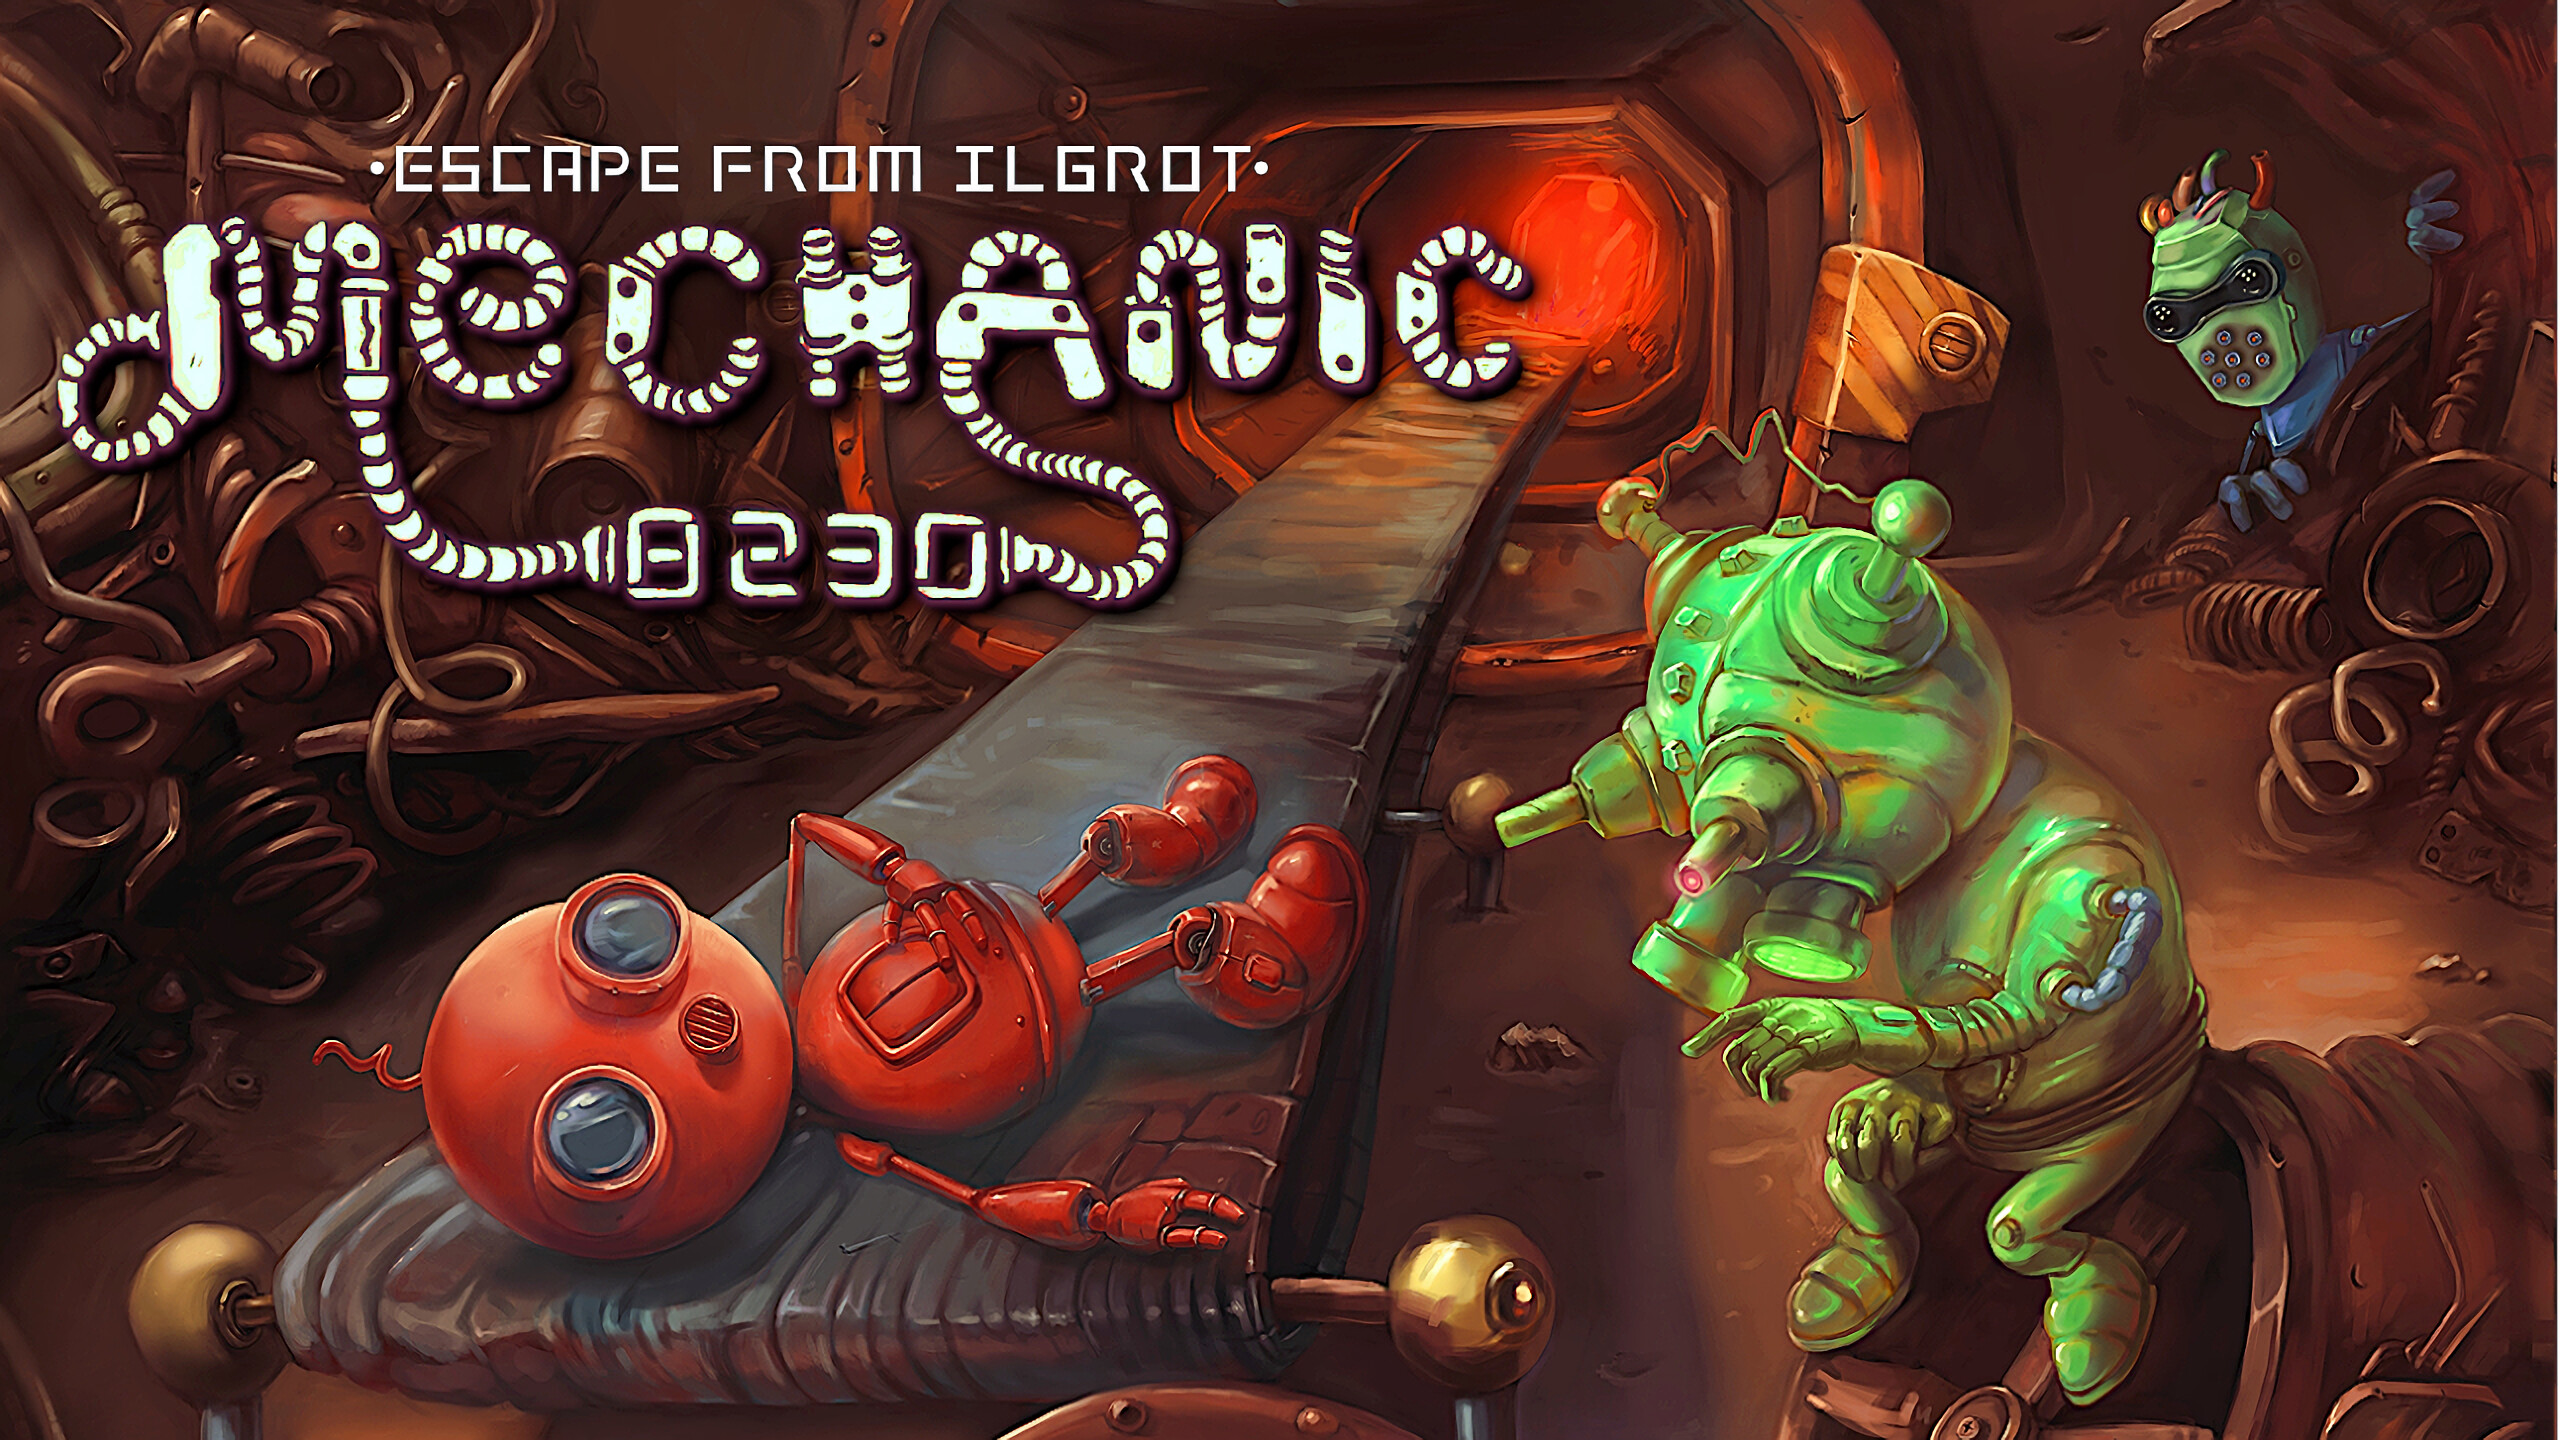 Mechanic 8230, Ingenious solutions, Exciting twists, Captivating storyline, 2560x1440 HD Desktop